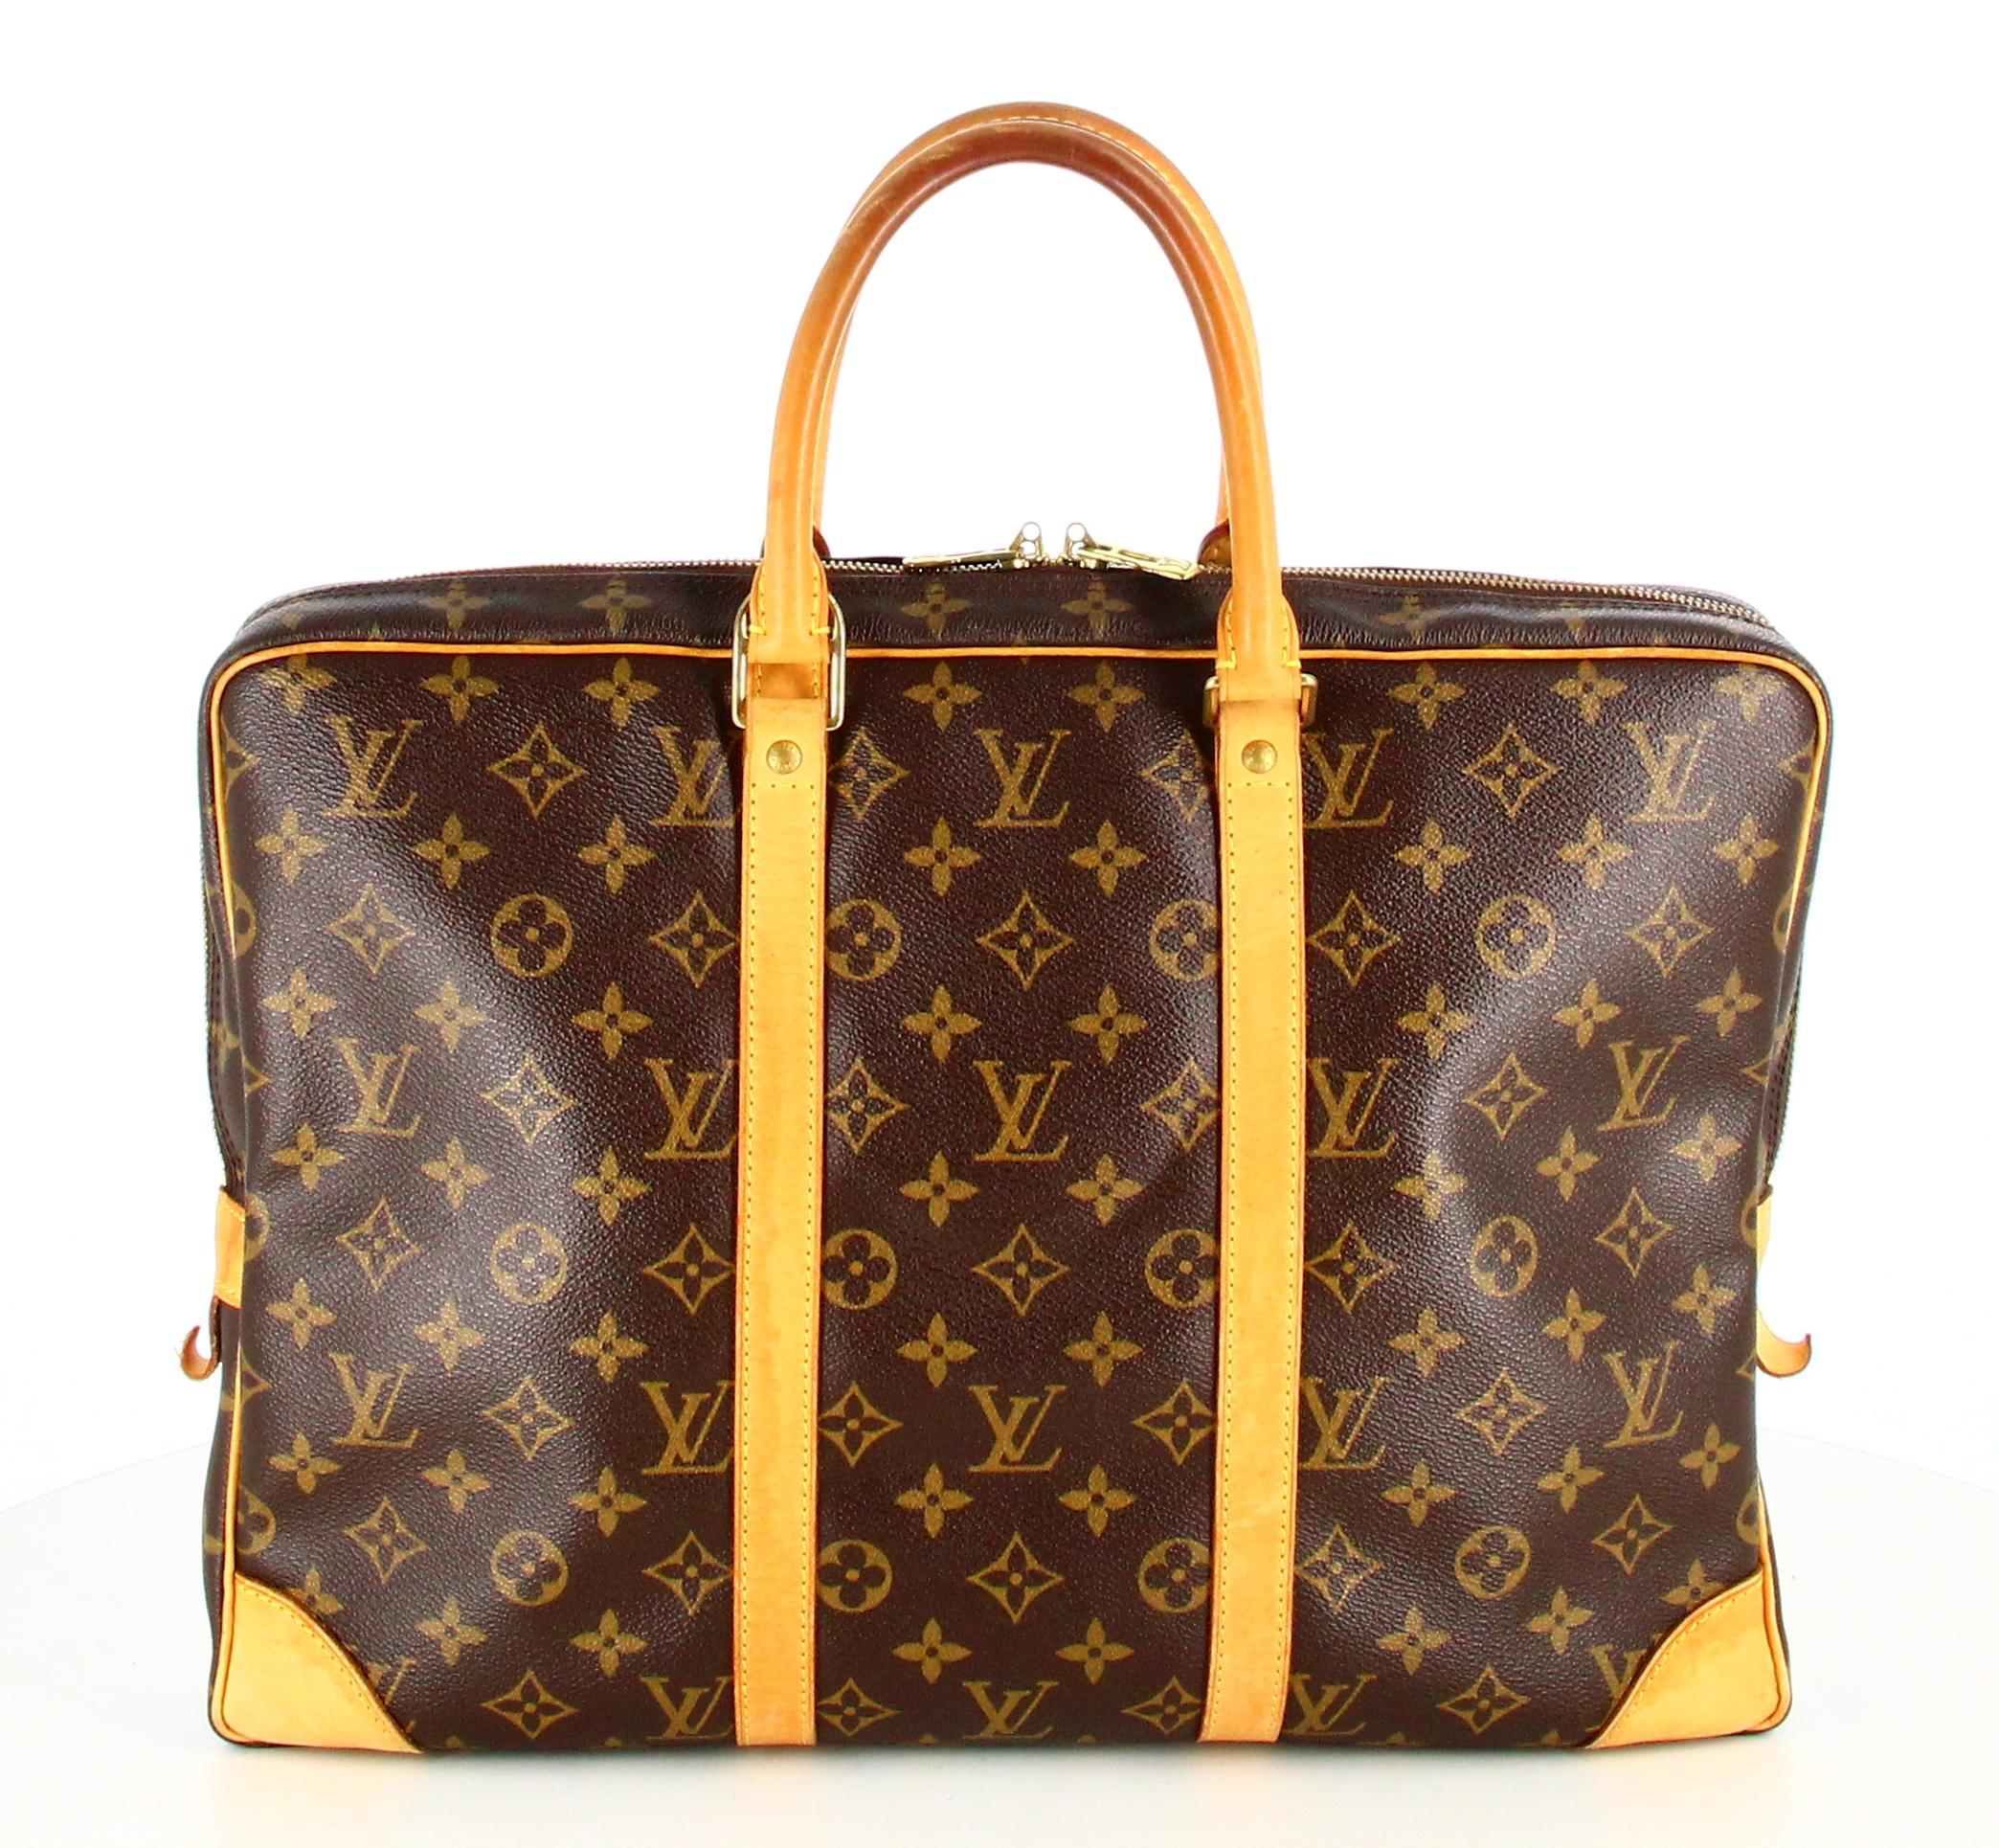 2007 Louis Vuitton Canvas Monogram Travel Document Case

- Very good condition. Shows very slight signs of wear over time. 
- Louis vuitton briefcase 
- Monogram canvas 
- Two brown leather straps 
- Clasp: golden zip
- Inside: several pockets